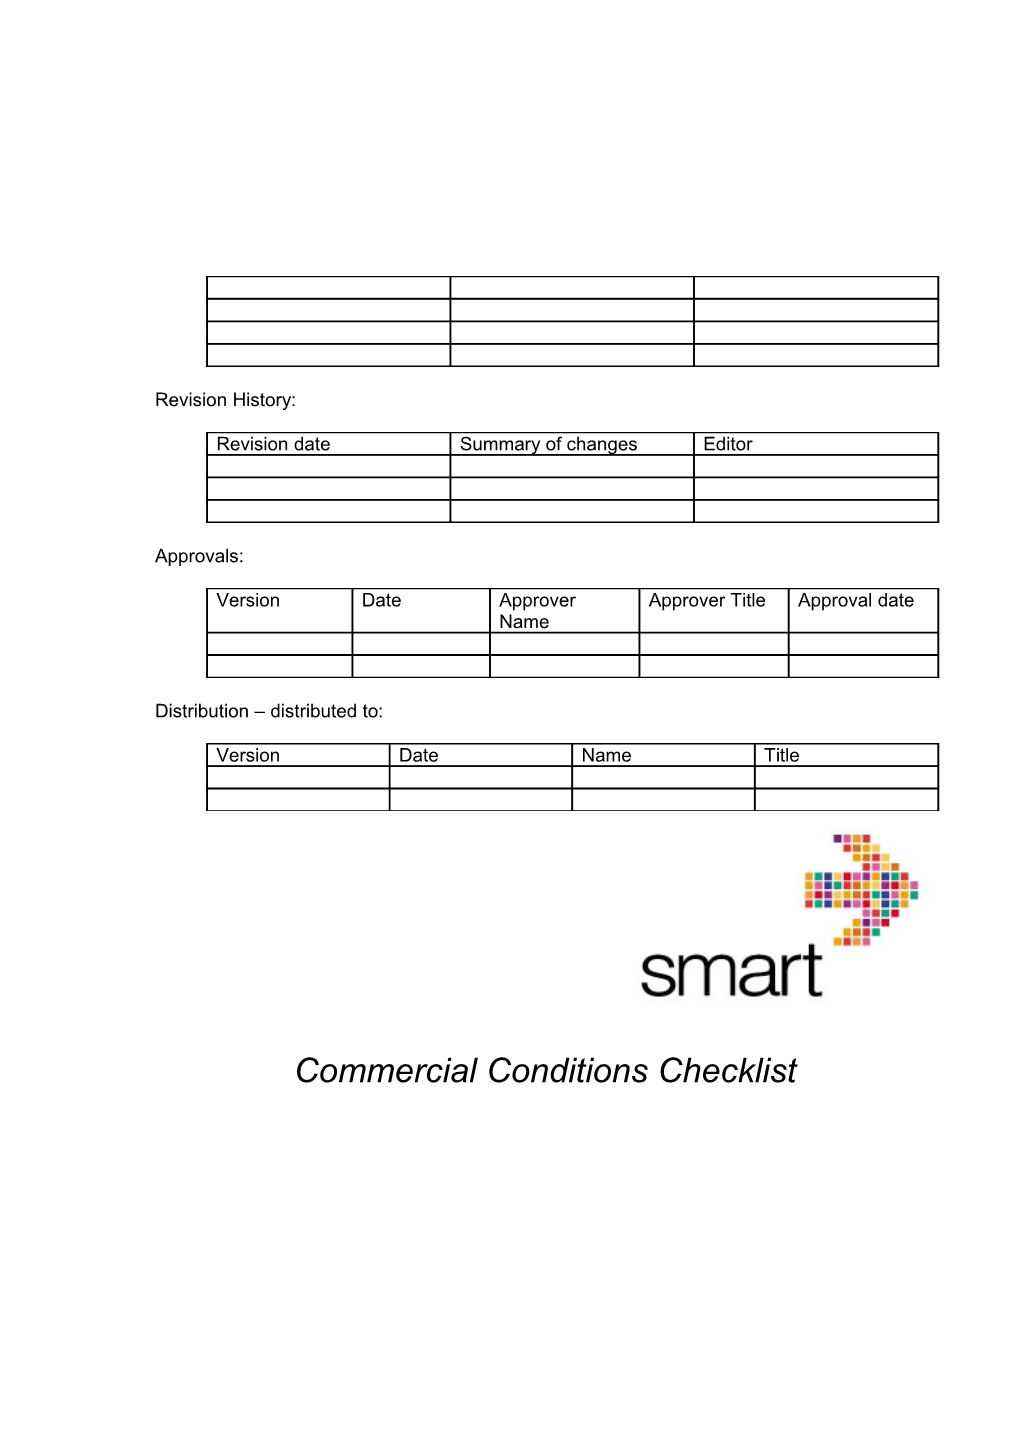 Document (Project) Title: WP8 09 Commercial Conditions Checklist